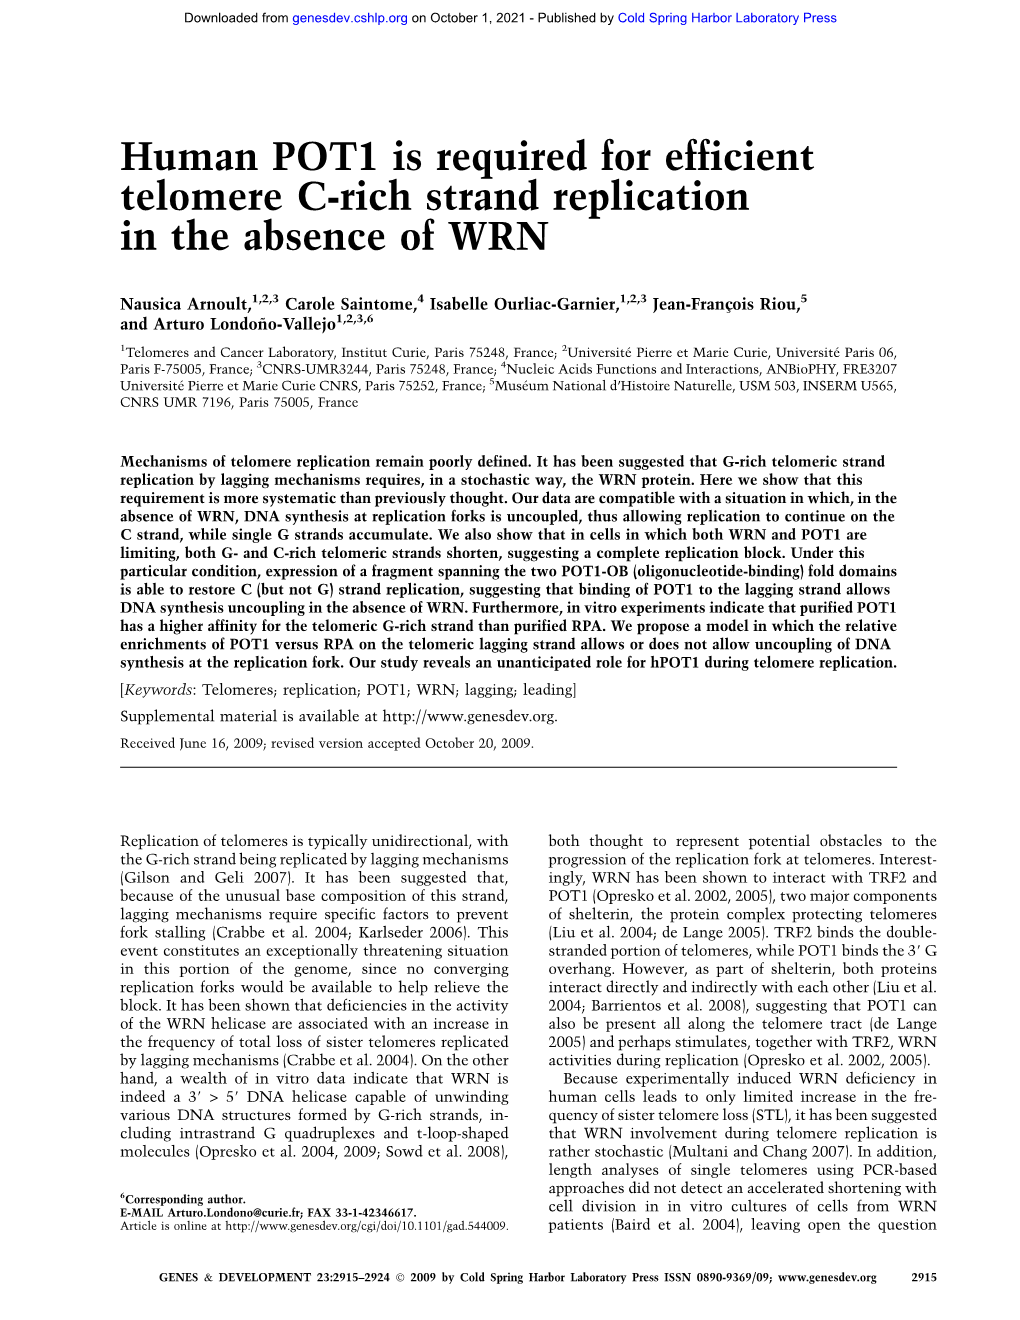 Human POT1 Is Required for Efficient Telomere C-Rich Strand Replication in the Absence of WRN